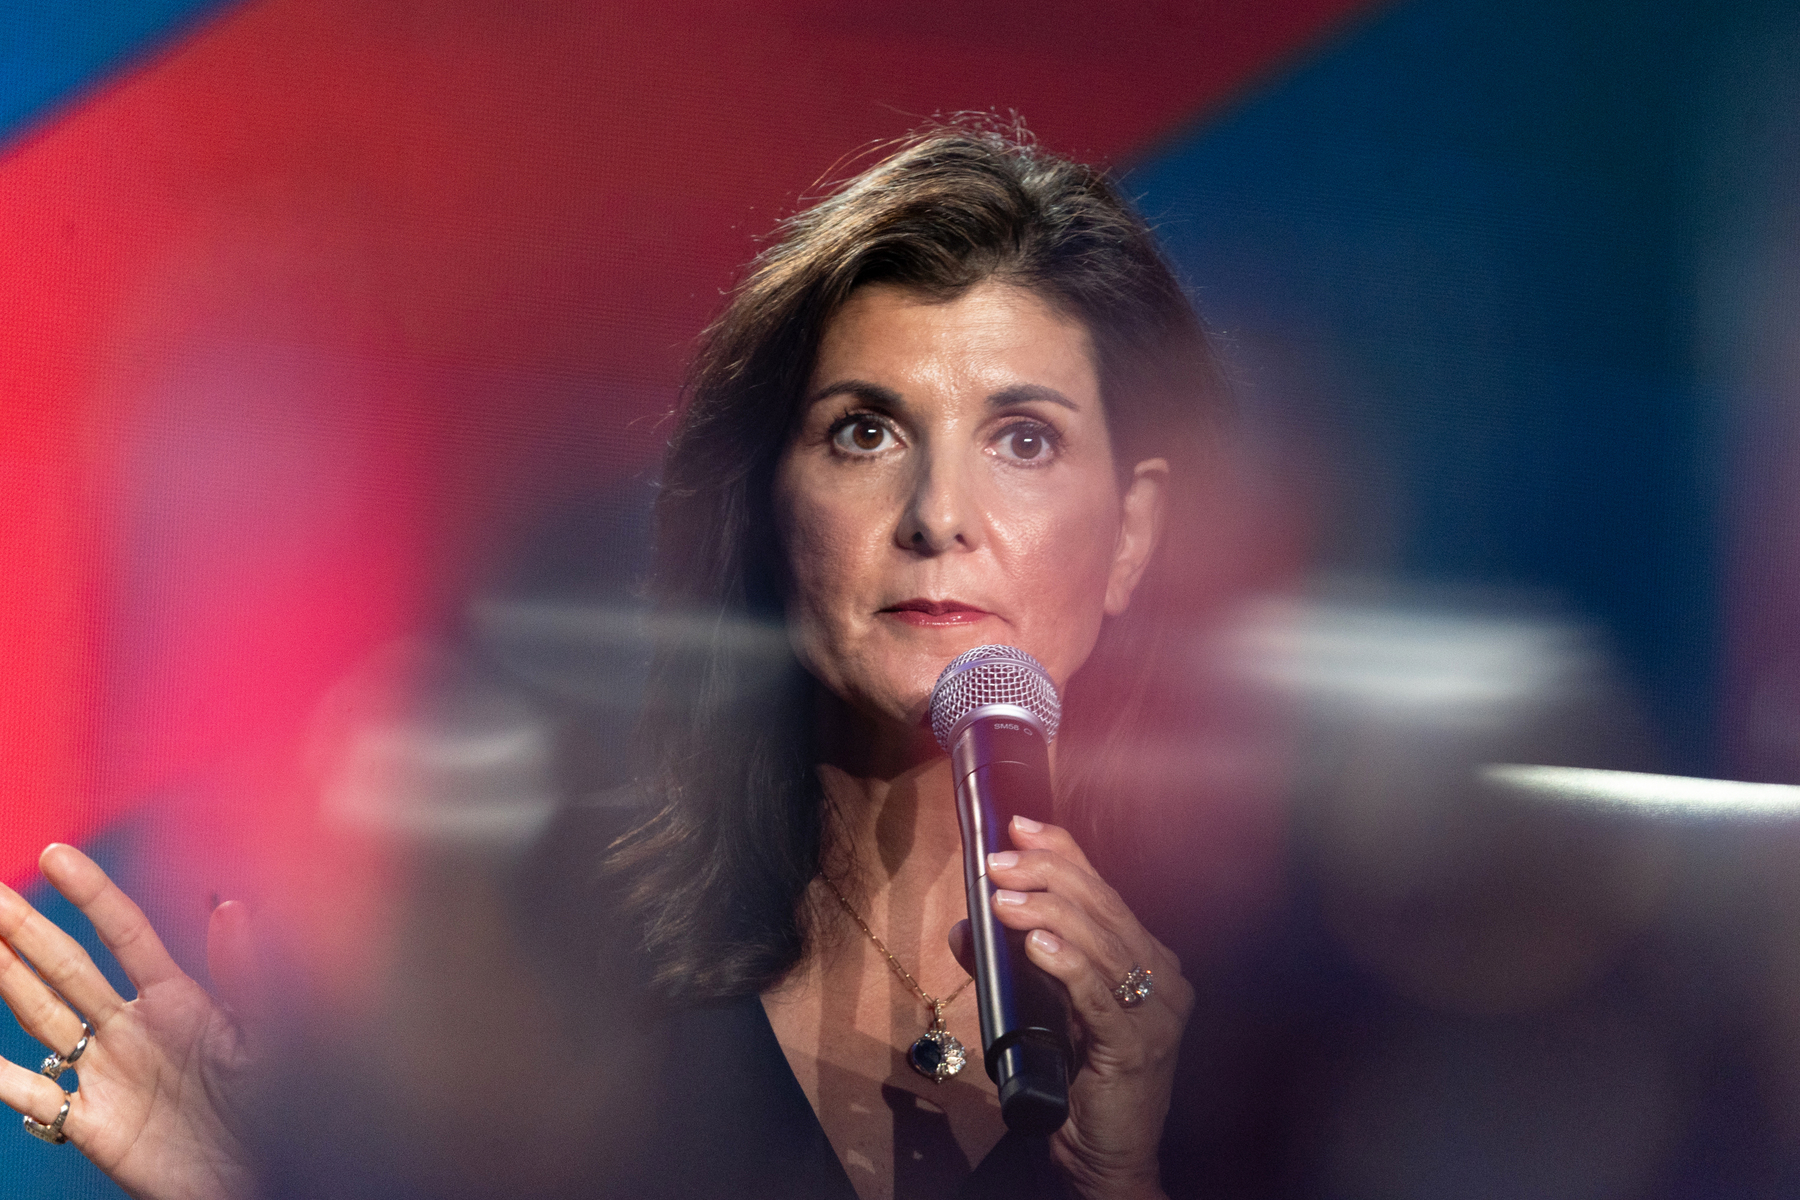 Republican U.S. presidential candidate Nikki Haley holds a microphone at an event.